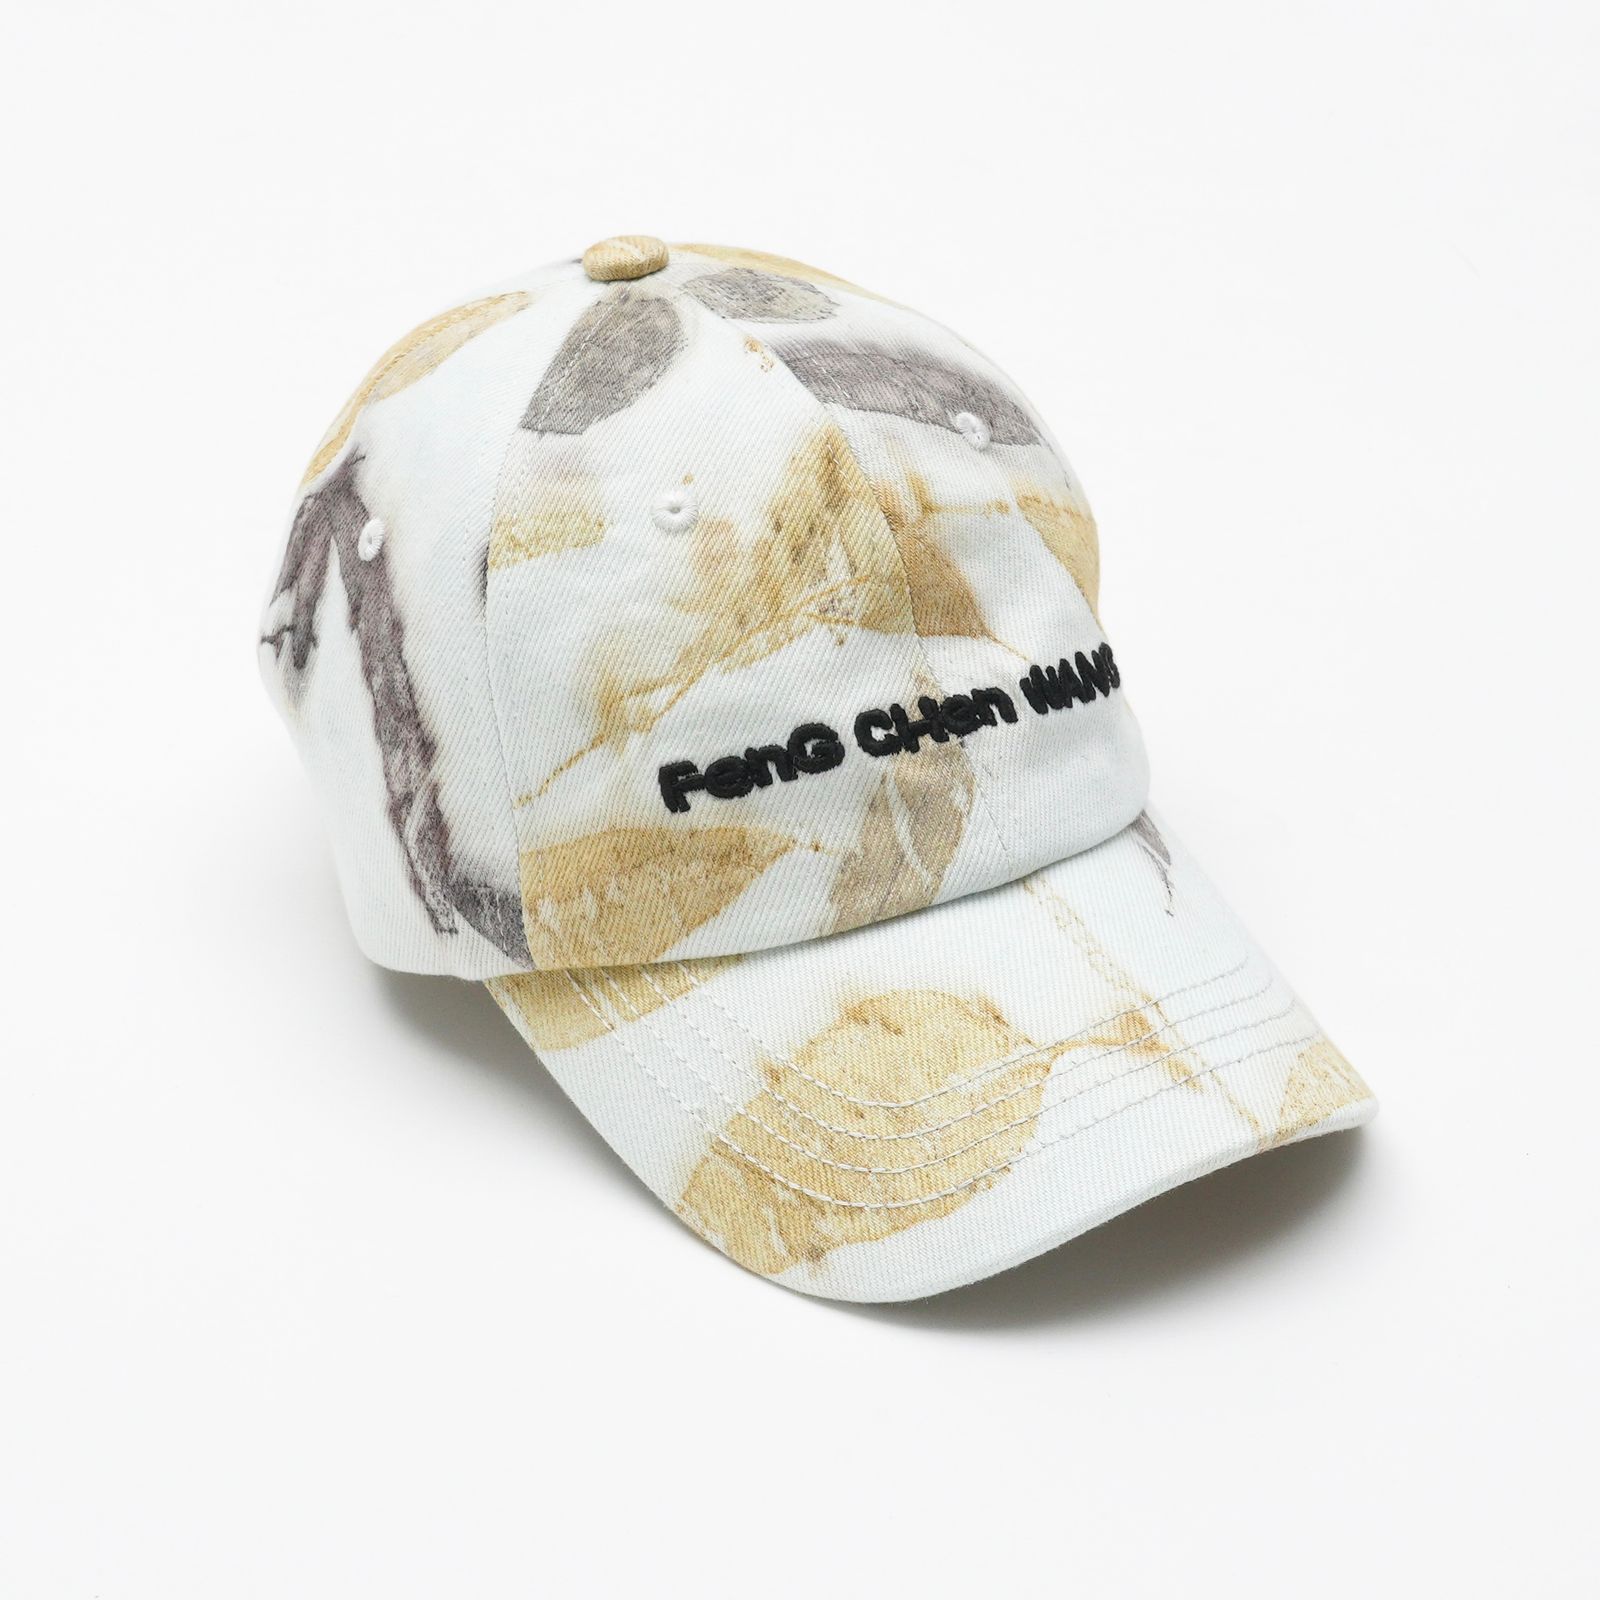 Feng Chen Wang - 【残りわずか】Straw Dyed Cap | ACRMTSM ONLINE STORE